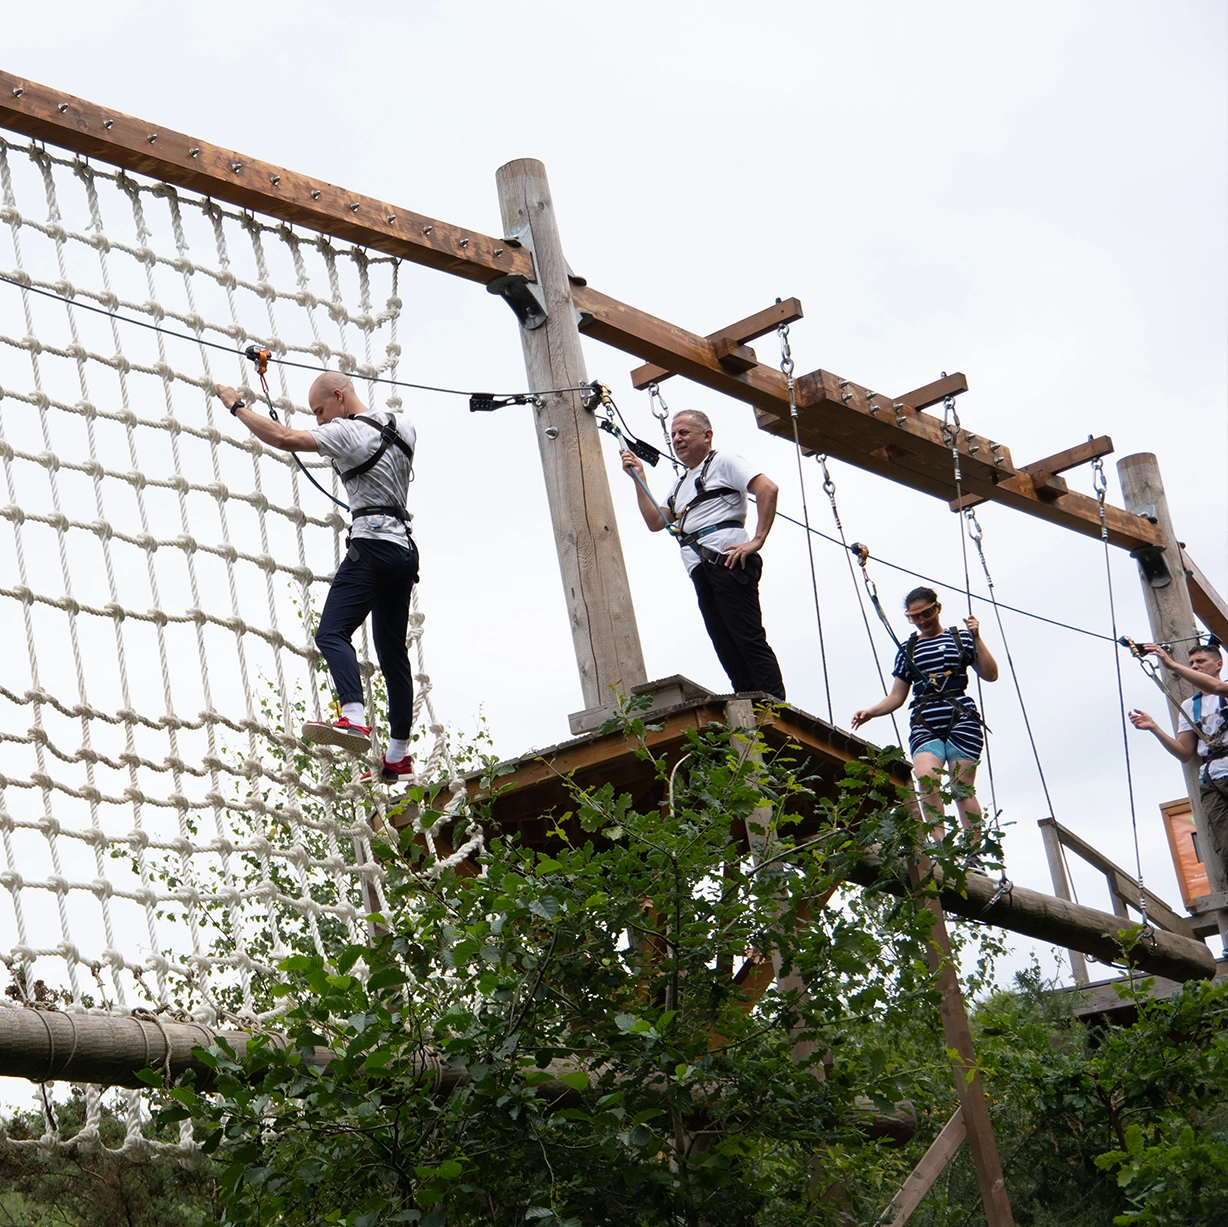 People climbing on the the skytrek course at hangloose